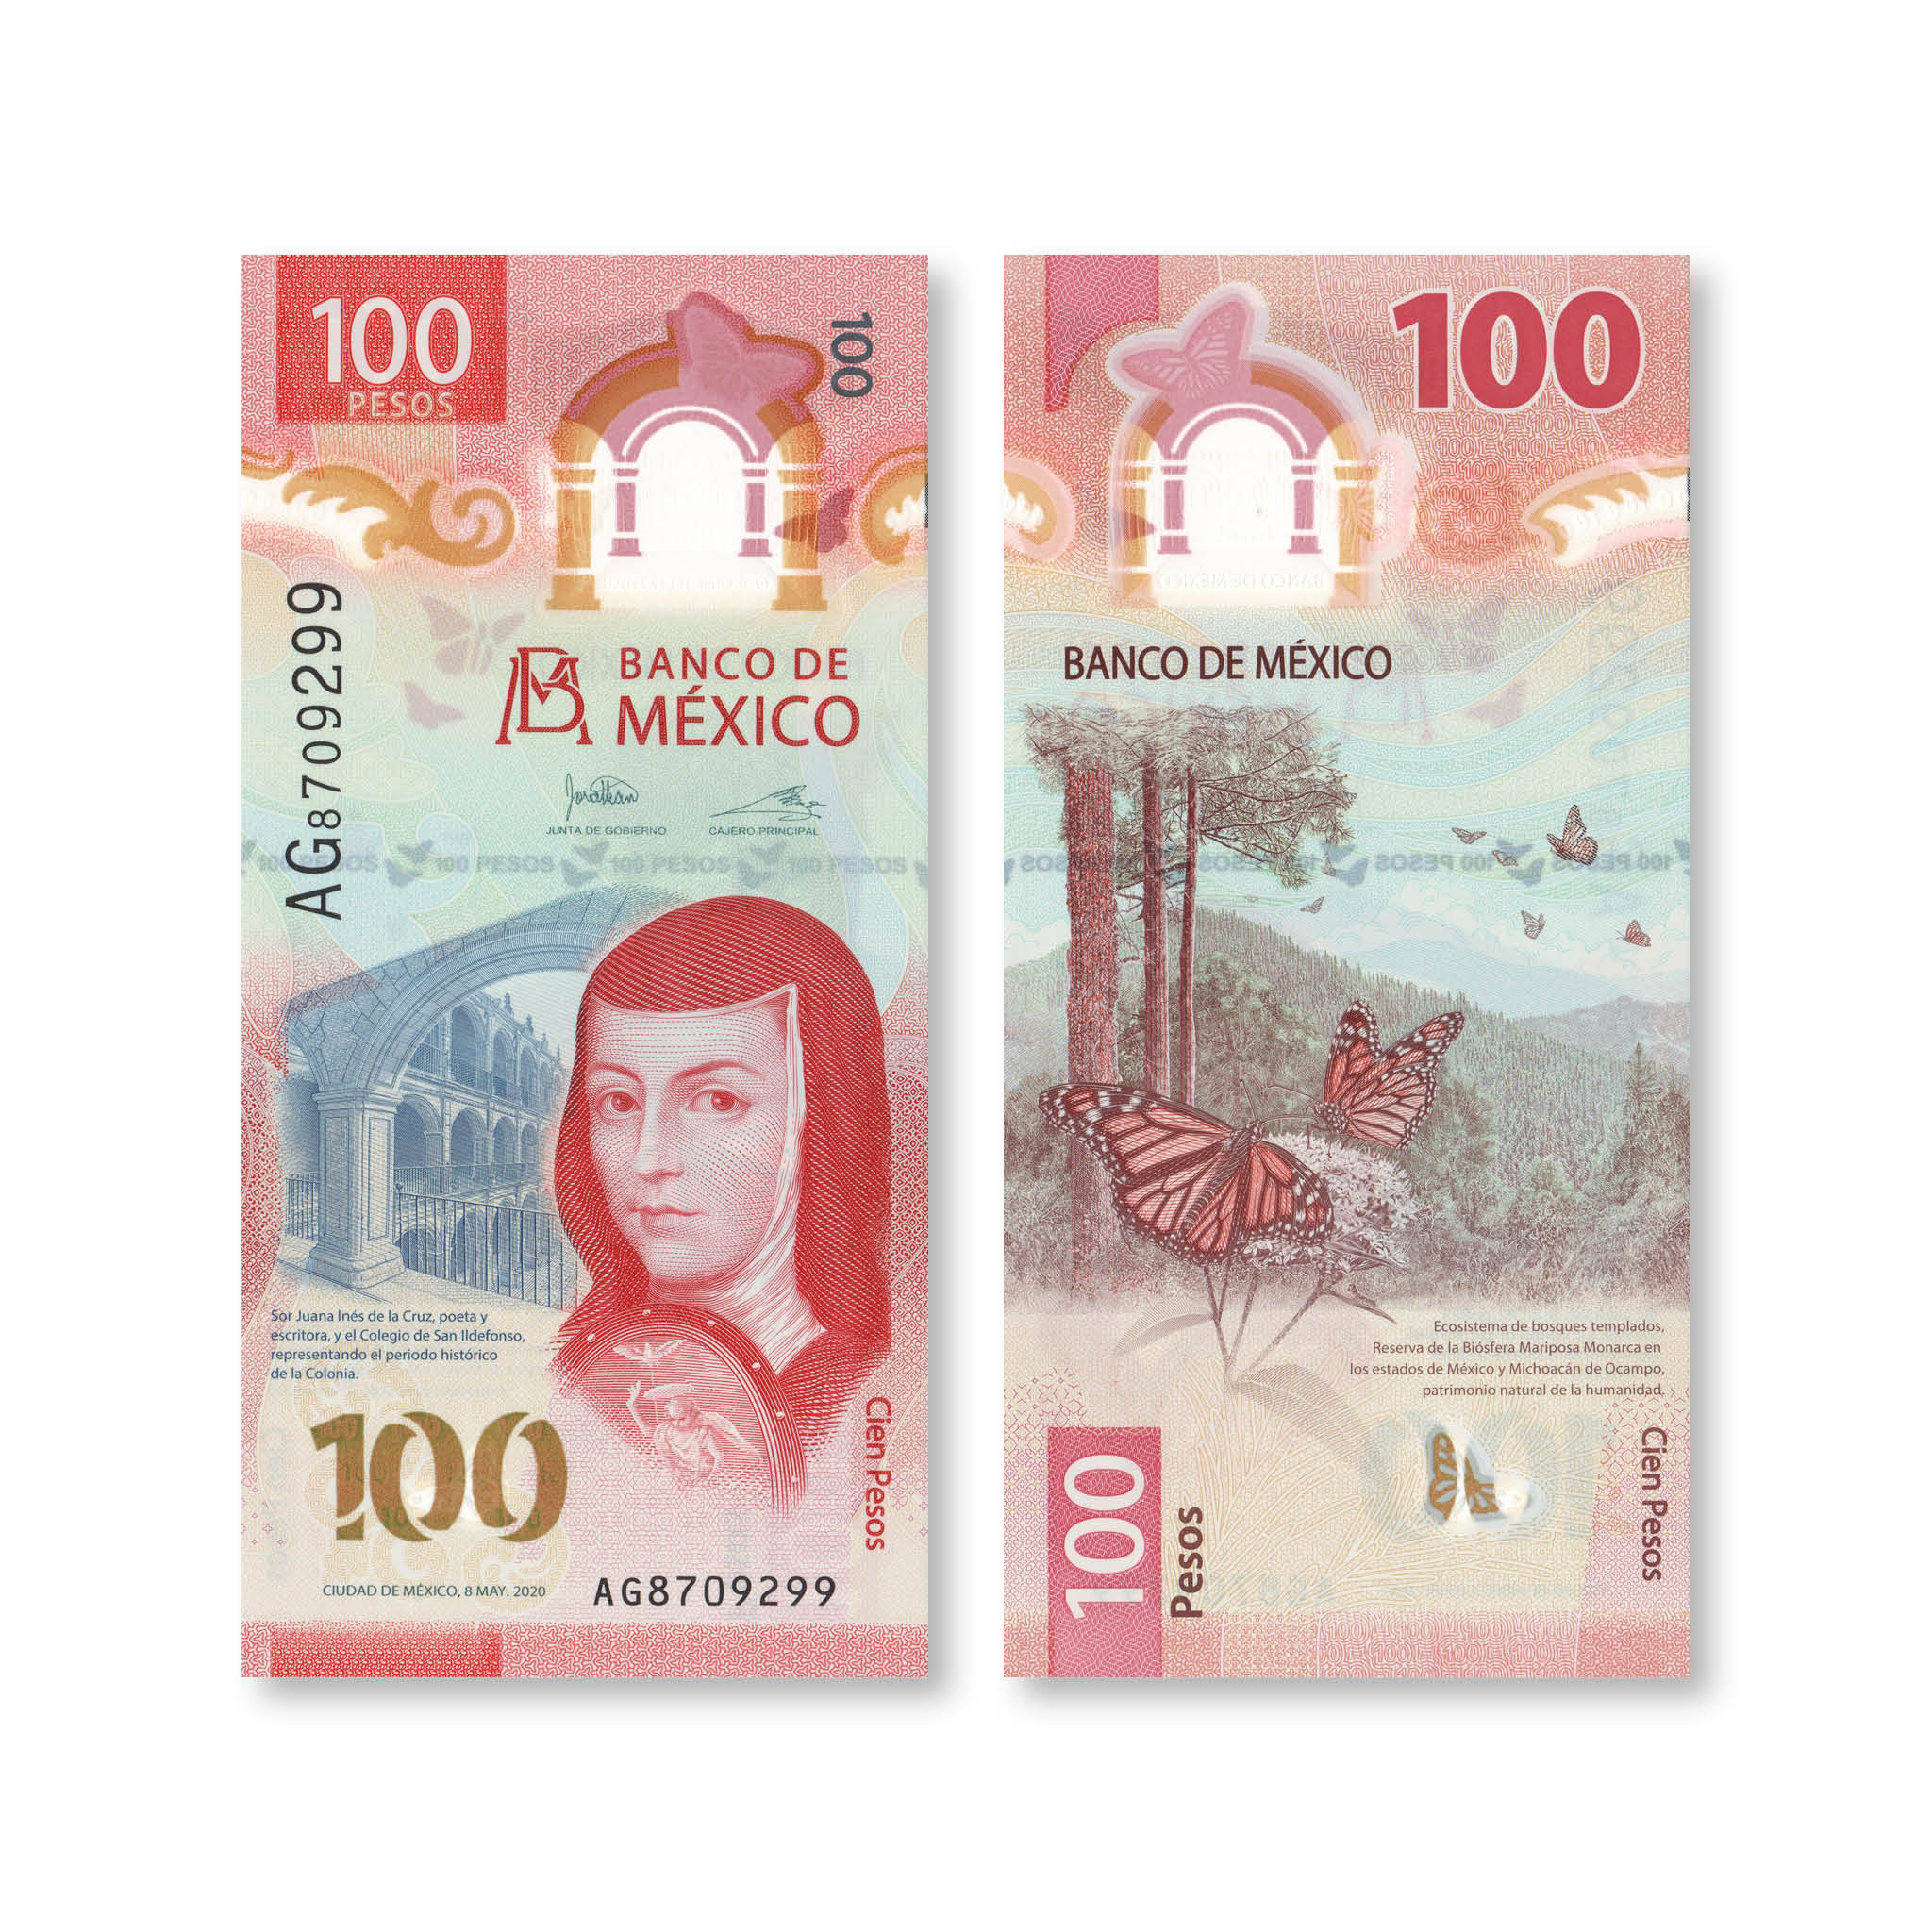 Mexico 100 Pesos, 2020, B715a, IBNS Banknote of the Year 2020, UNC - Robert's World Money - World Banknotes